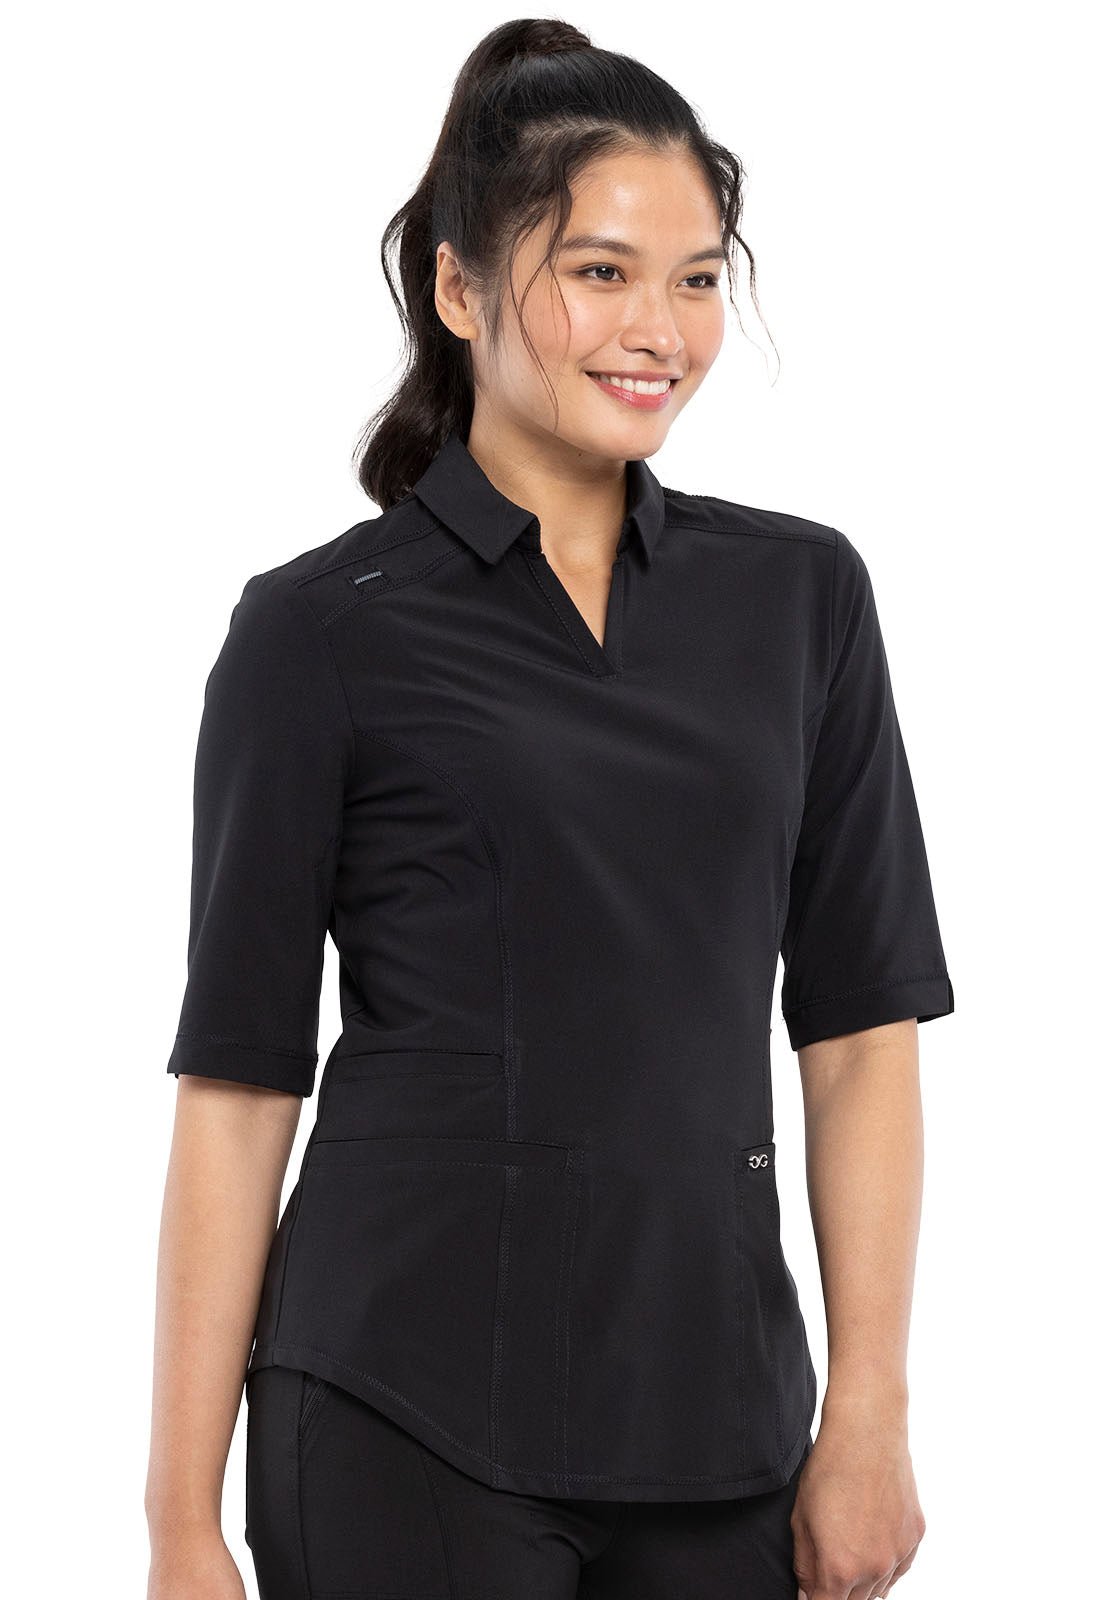 Black Infinity Scrubs Polo Shirt - Right Side View